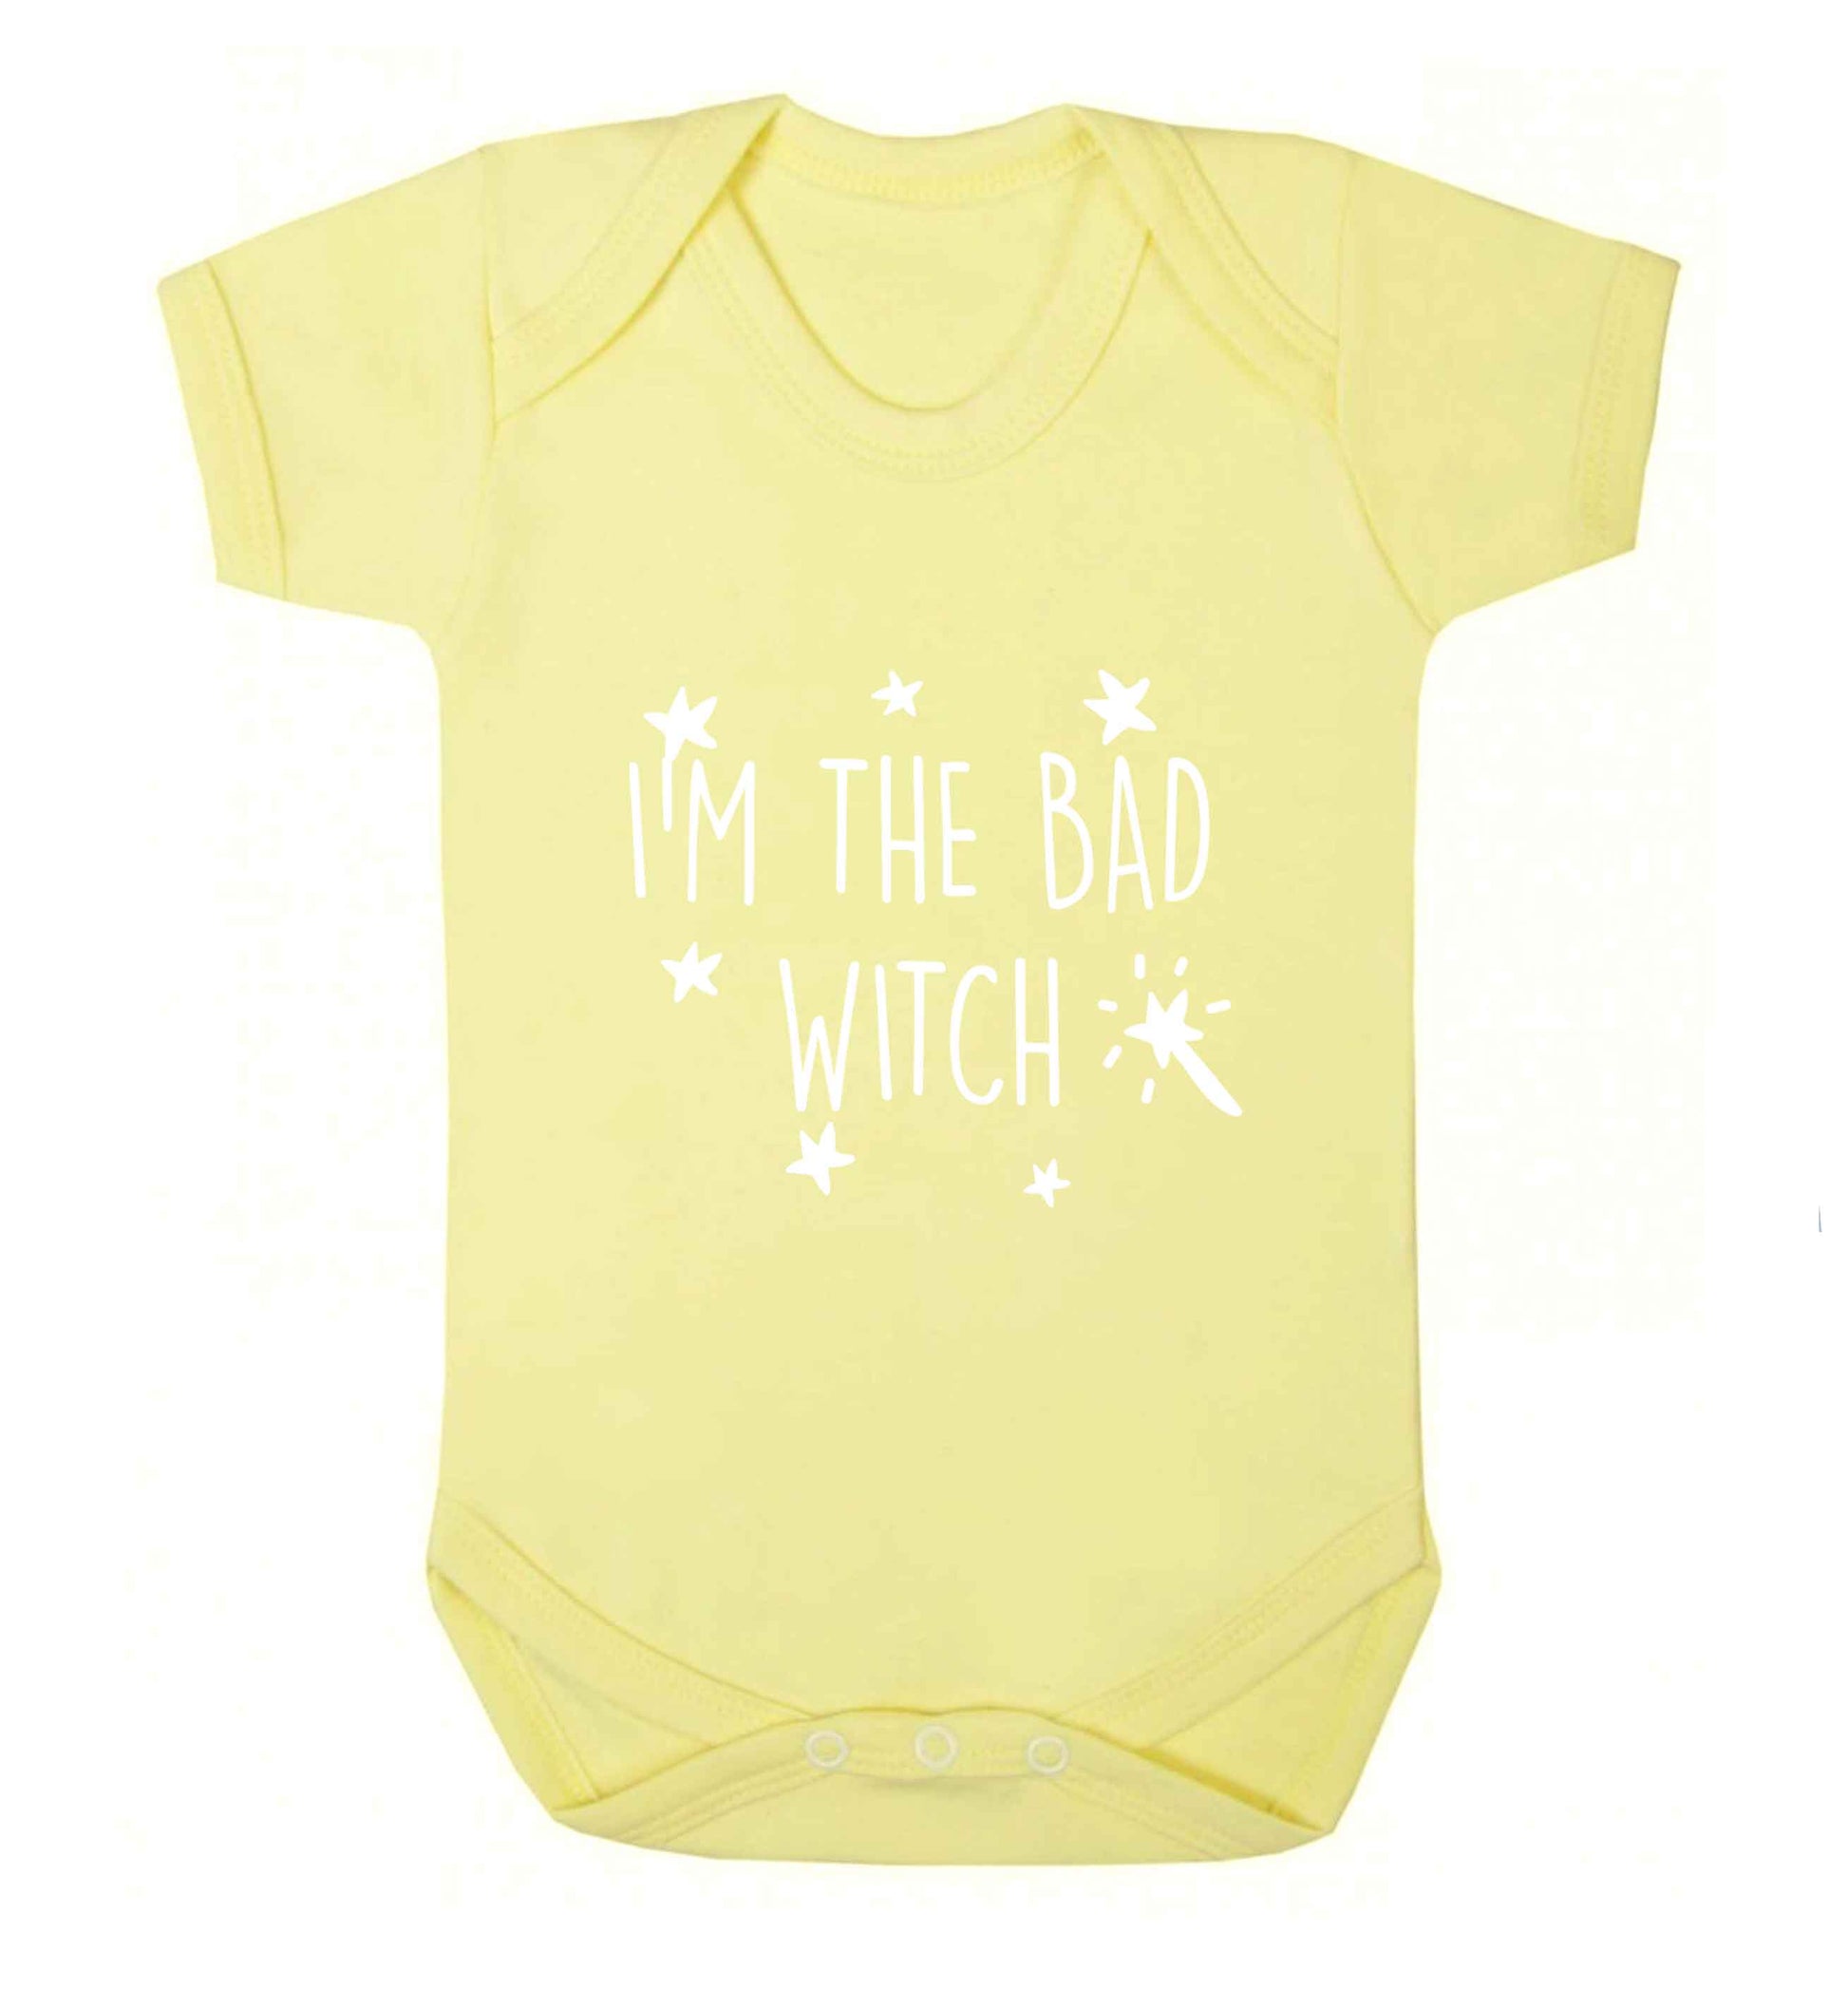 Bad witch baby vest pale yellow 18-24 months